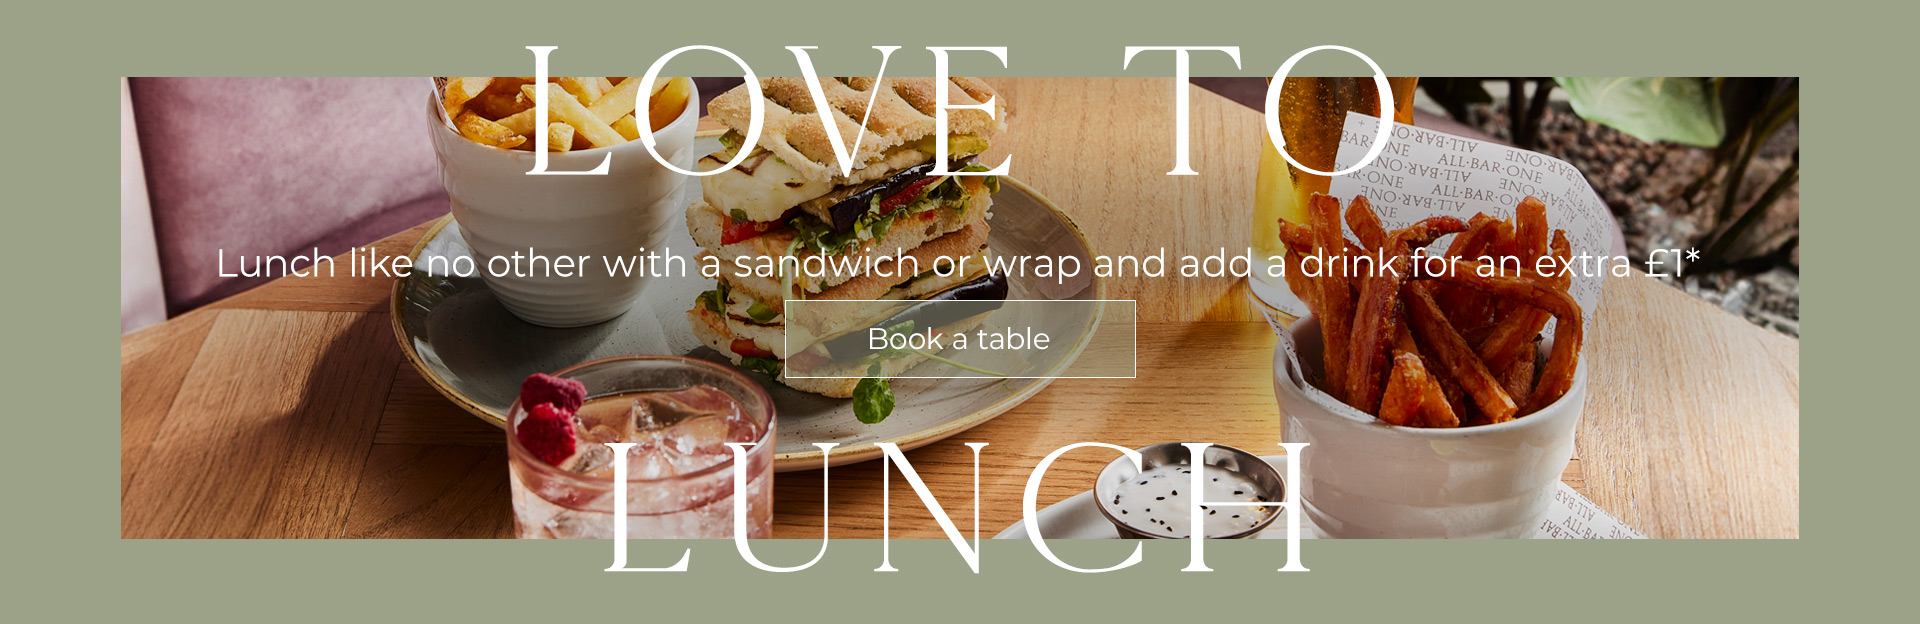 Lunch Offer at All Bar One Oxford